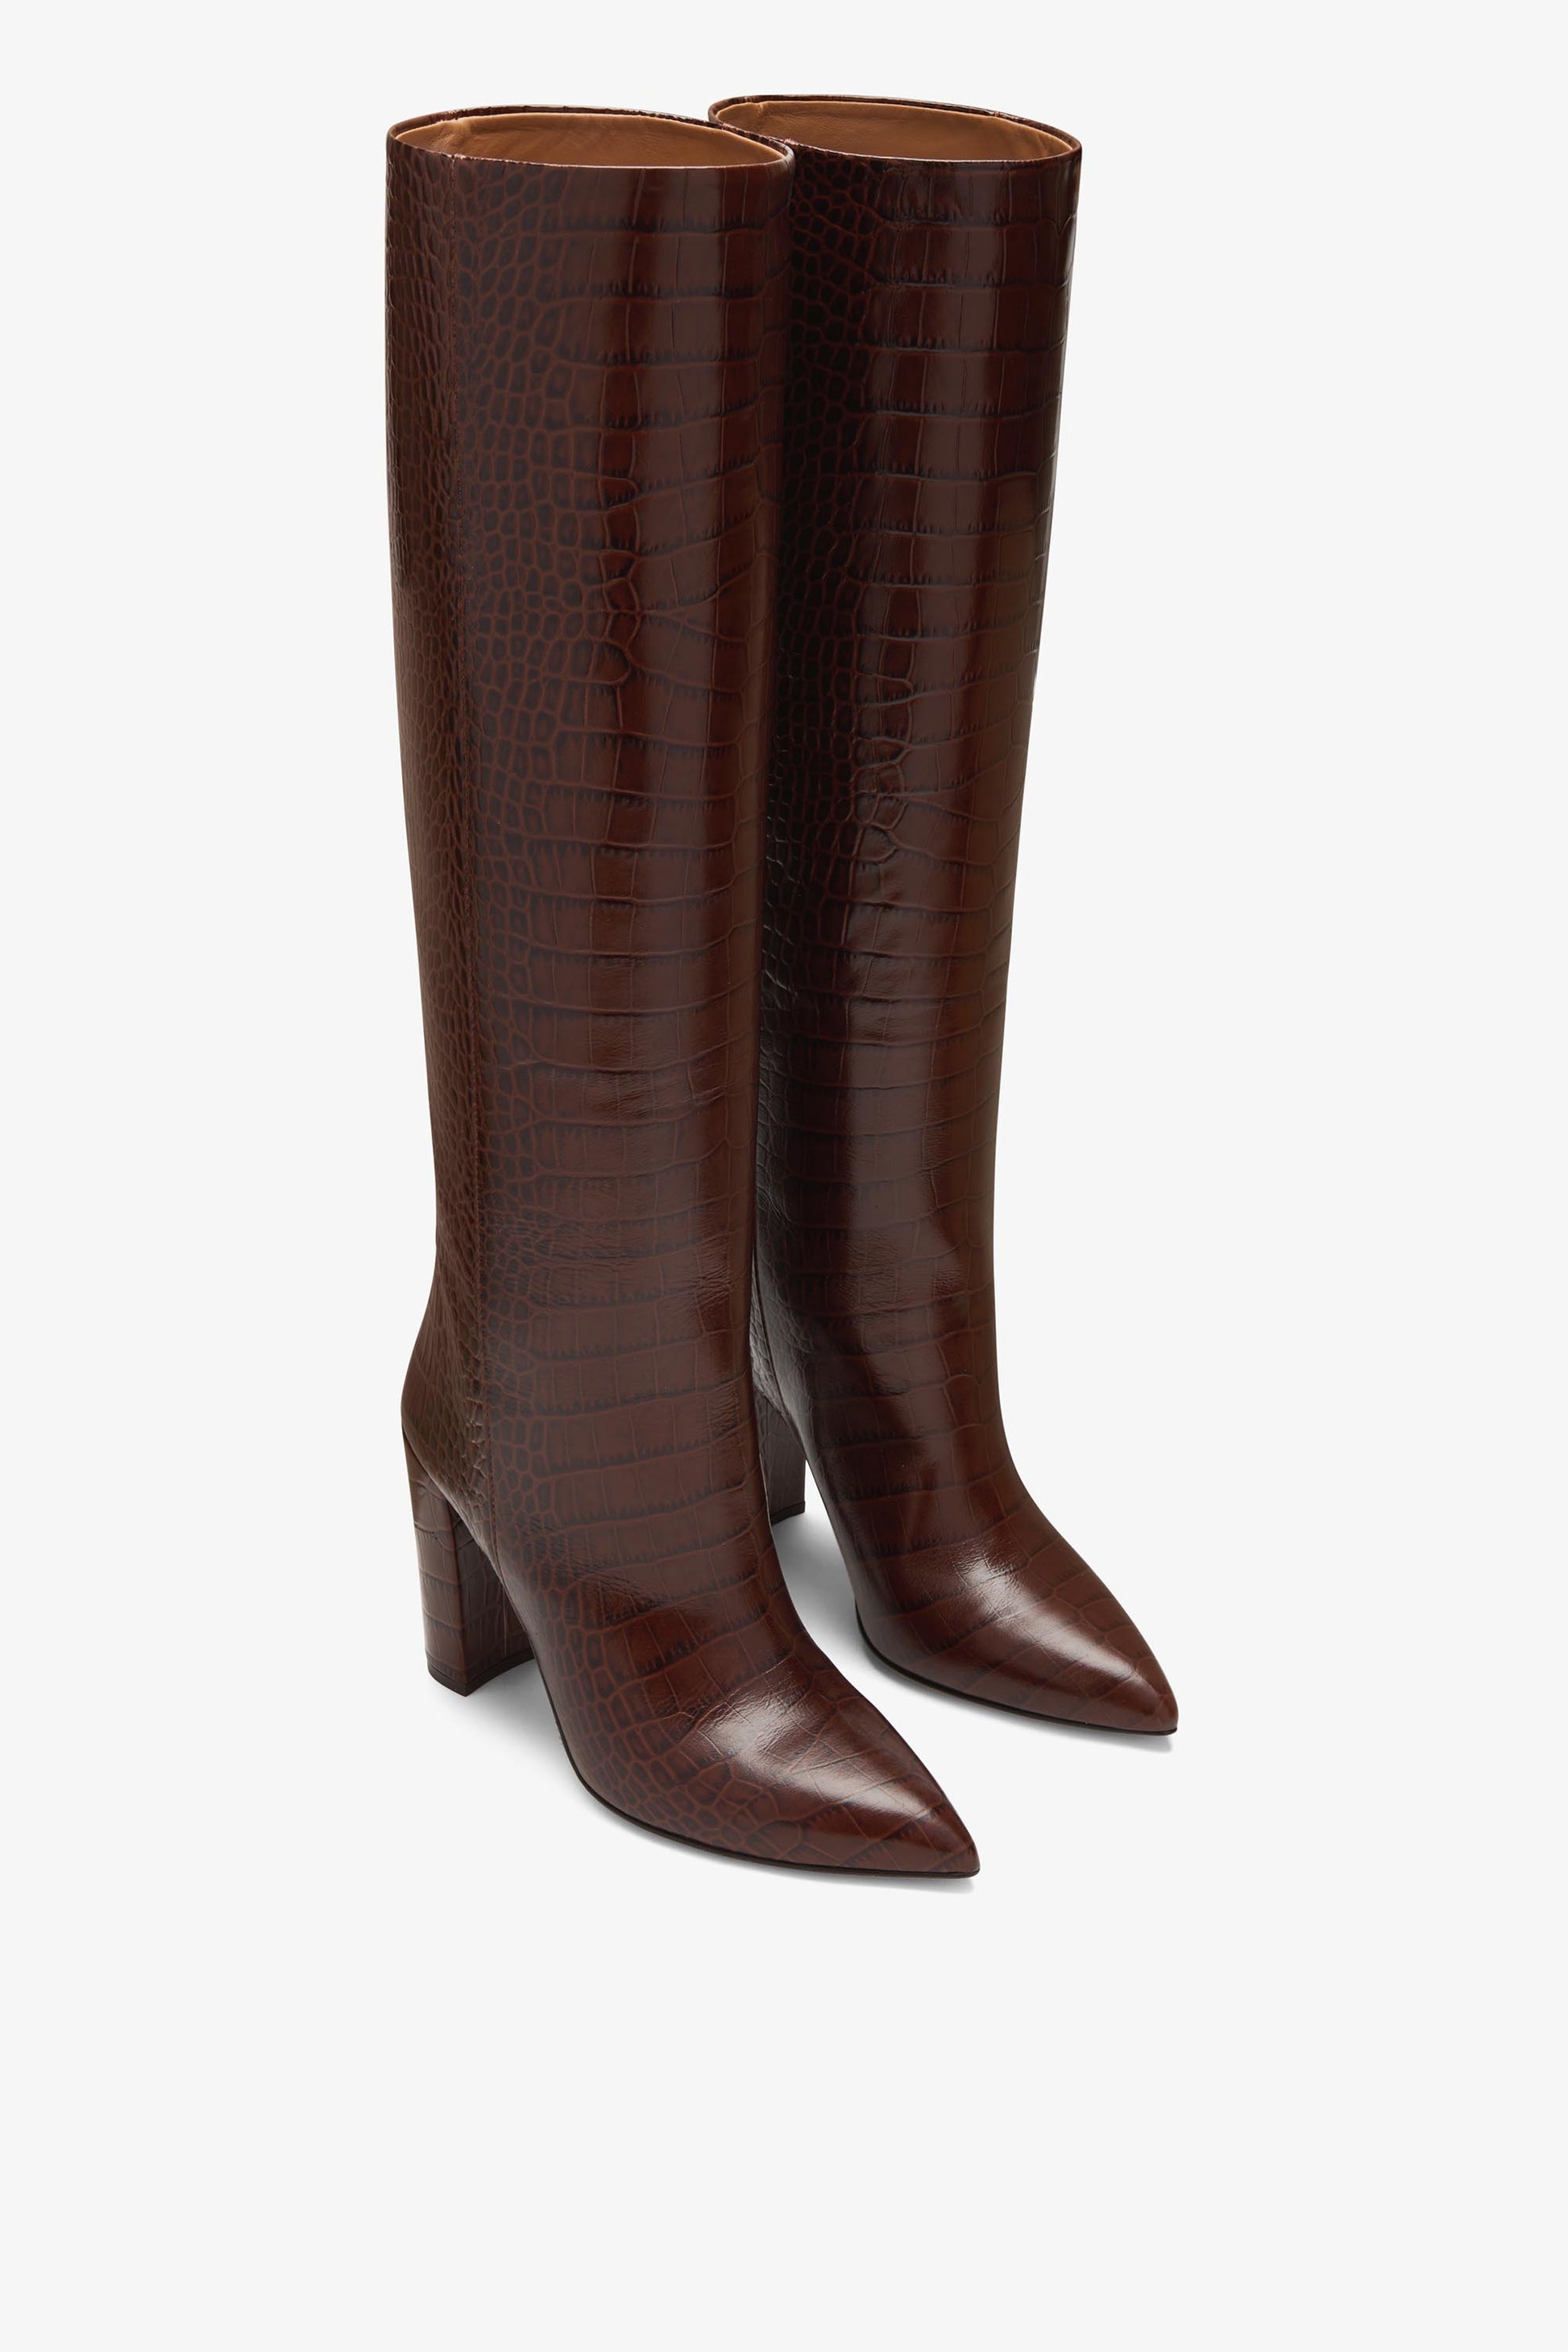 Chocolate brown croc-effect leather boots